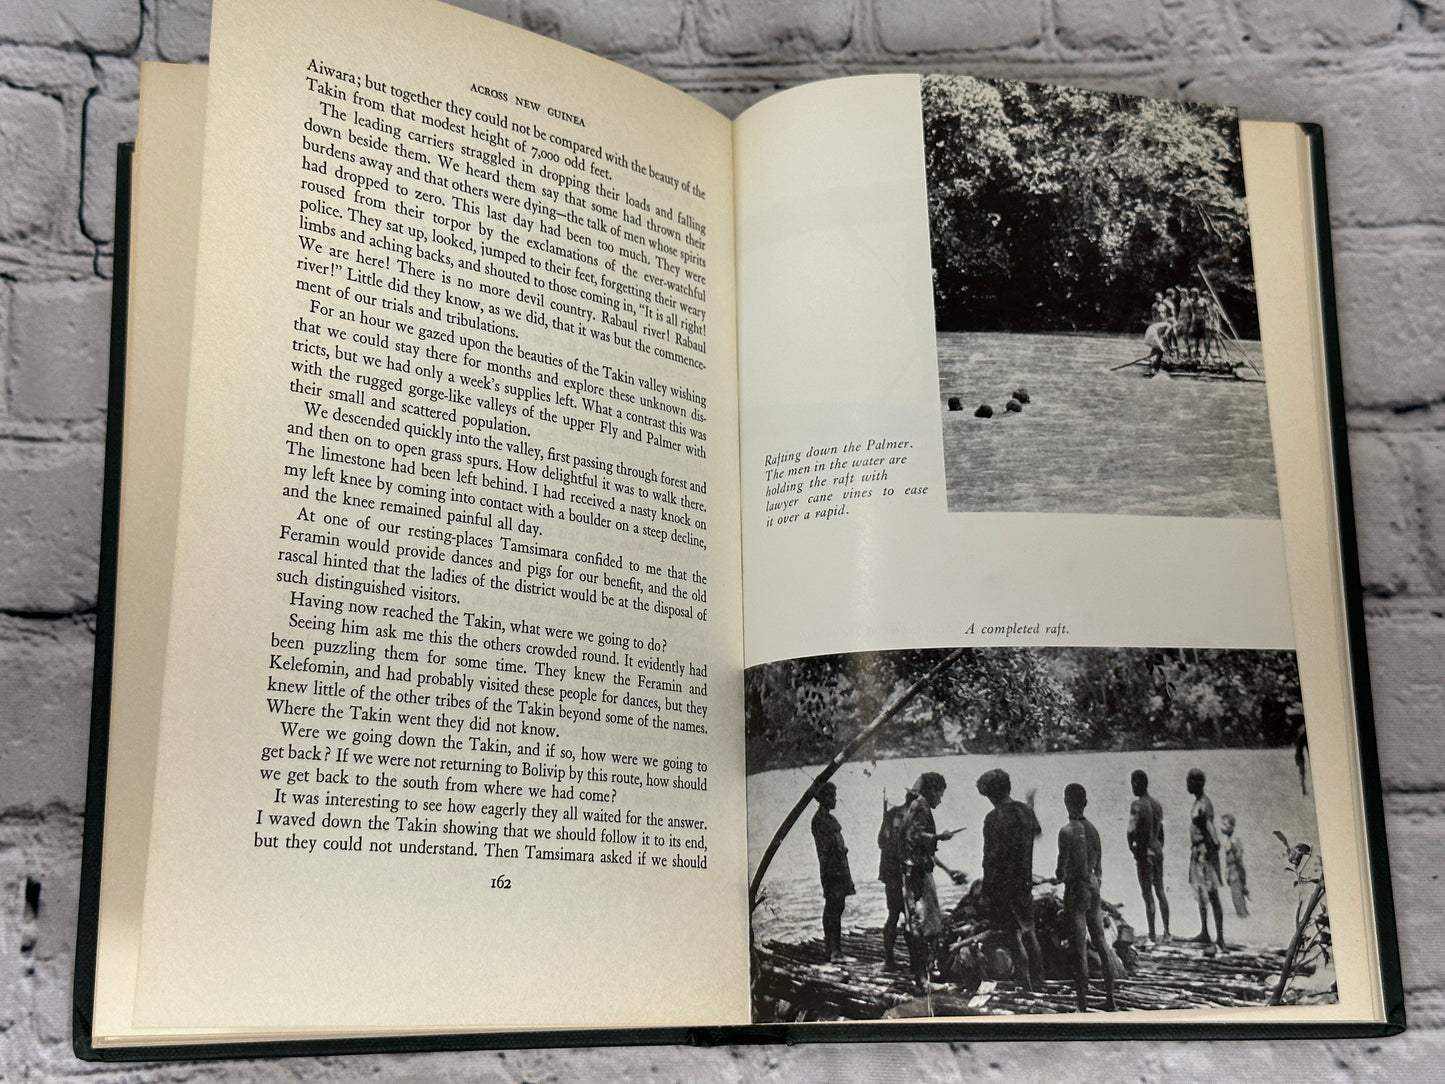 Across New Guinea: From the Fly to the Sepik by Ivan Champion [1966]